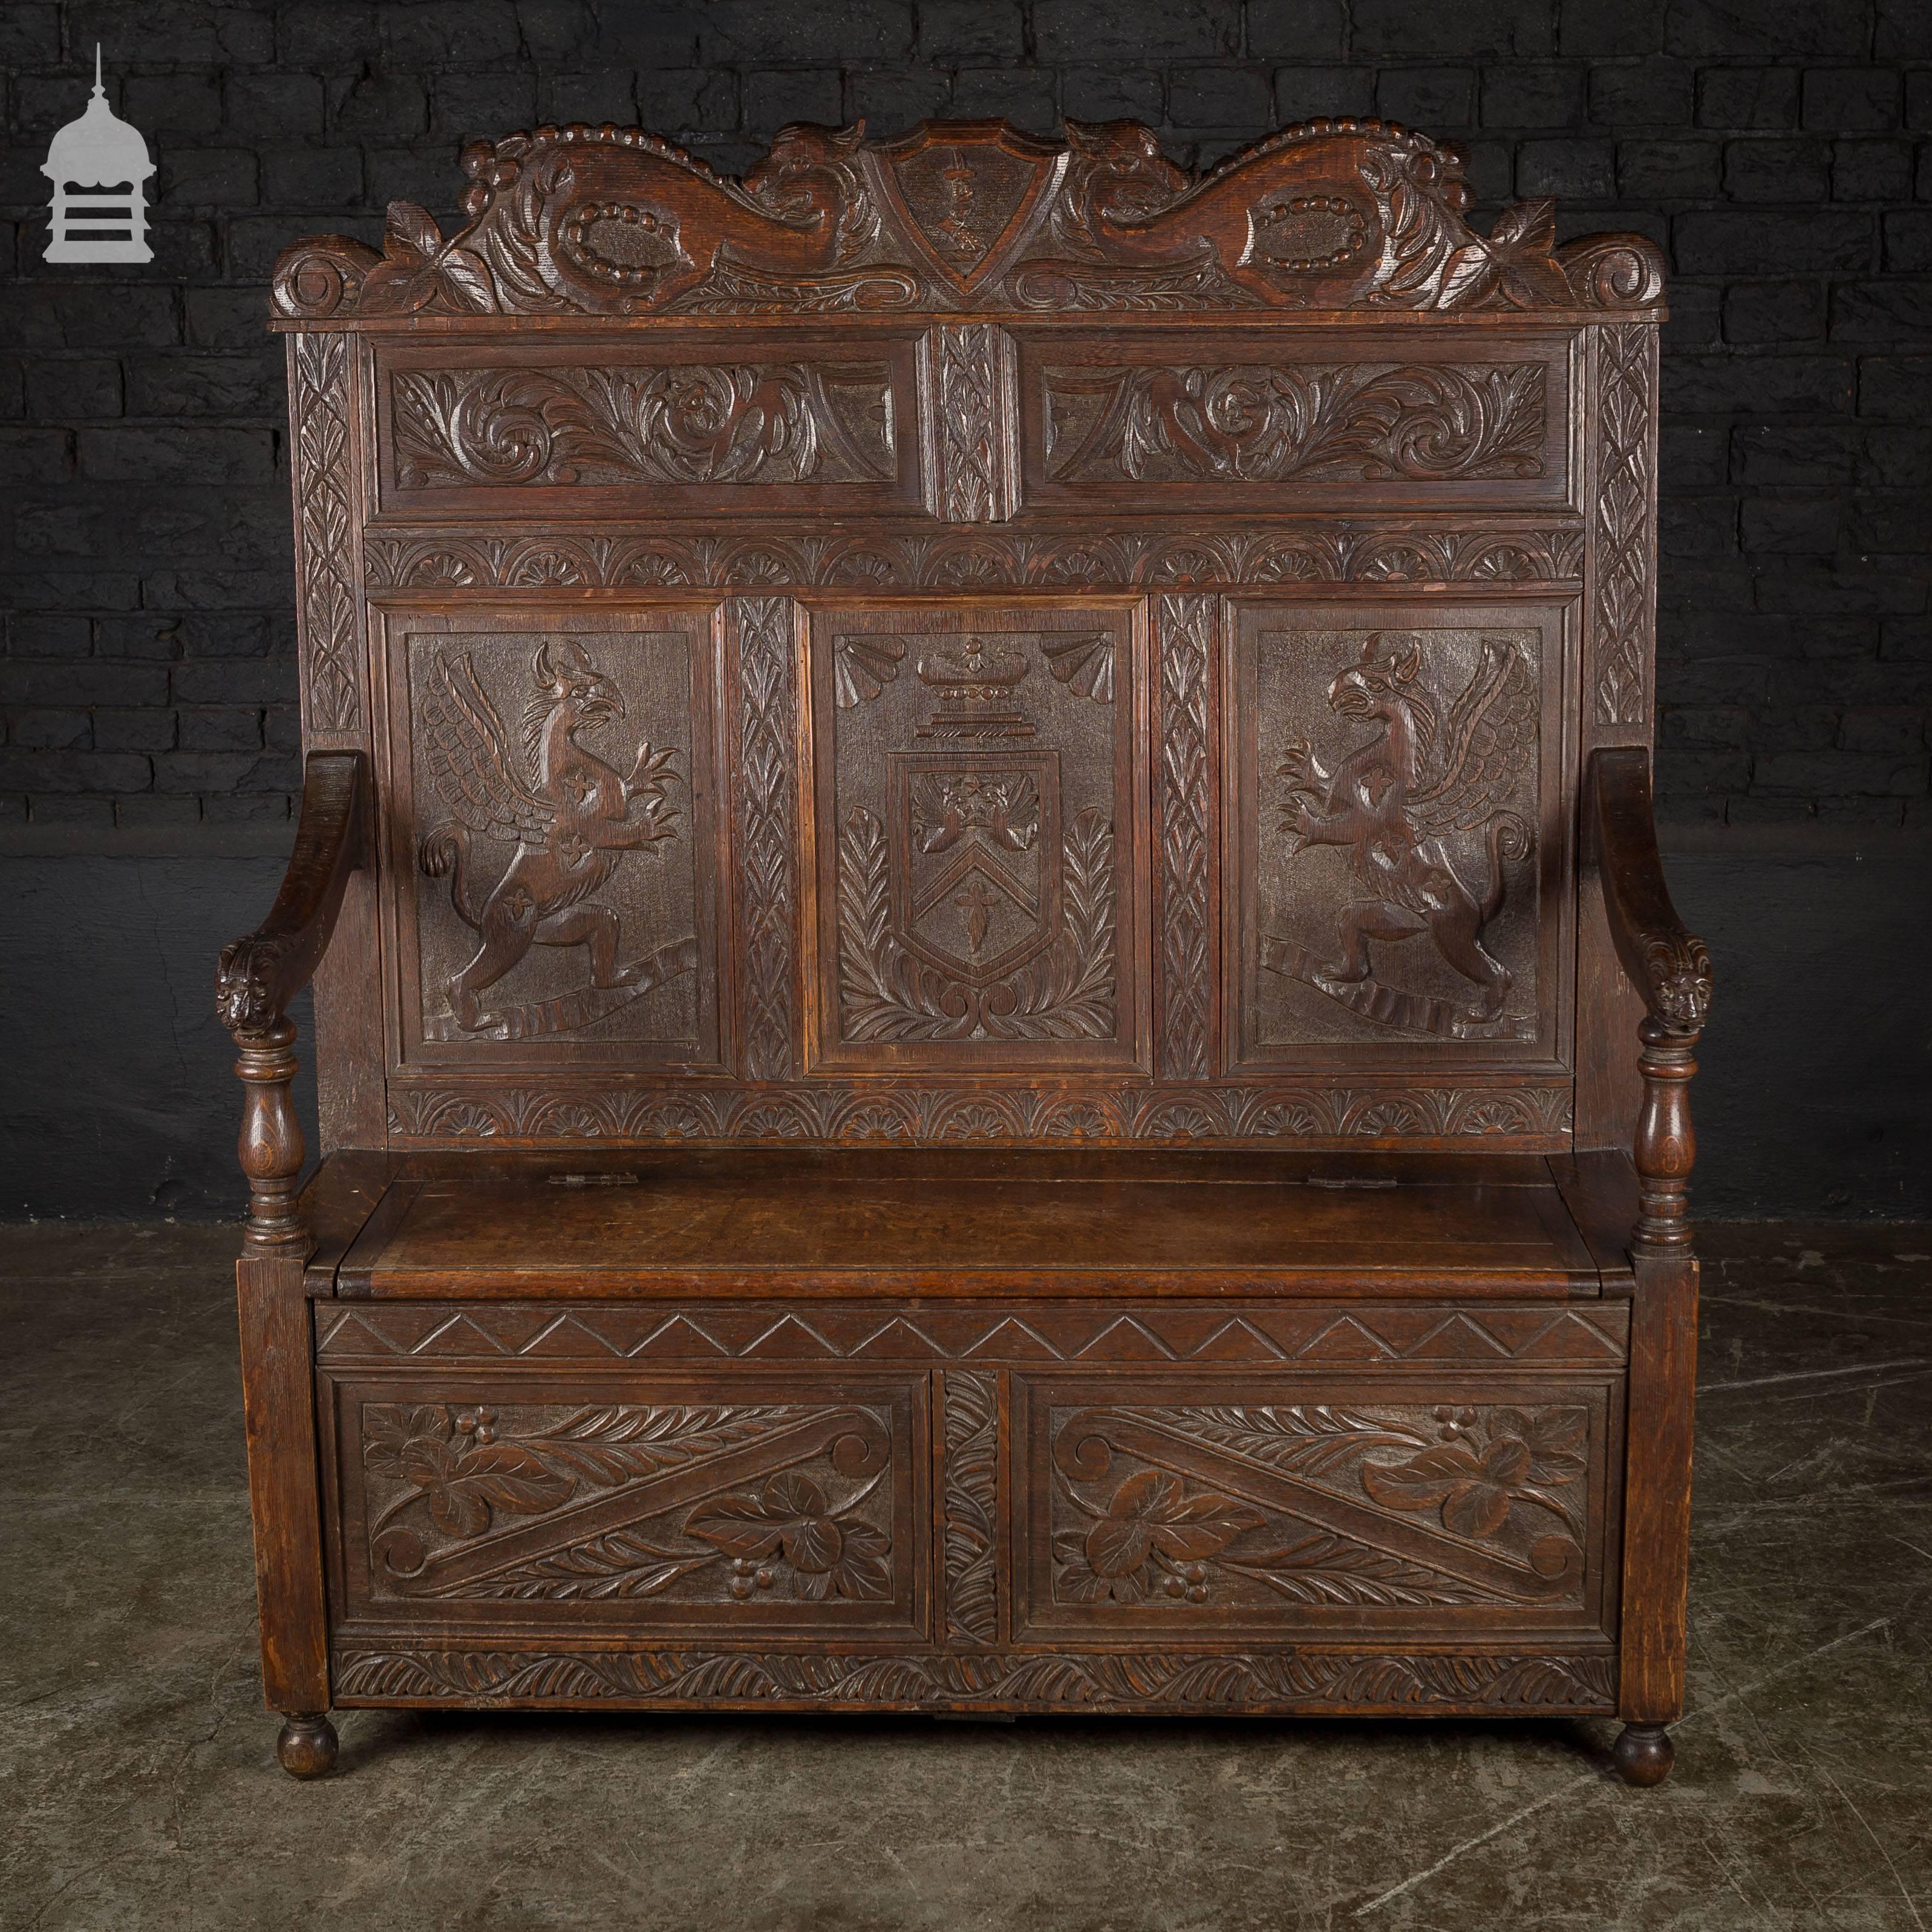 Fine example of 19th century carved oak monks bench pew settle.